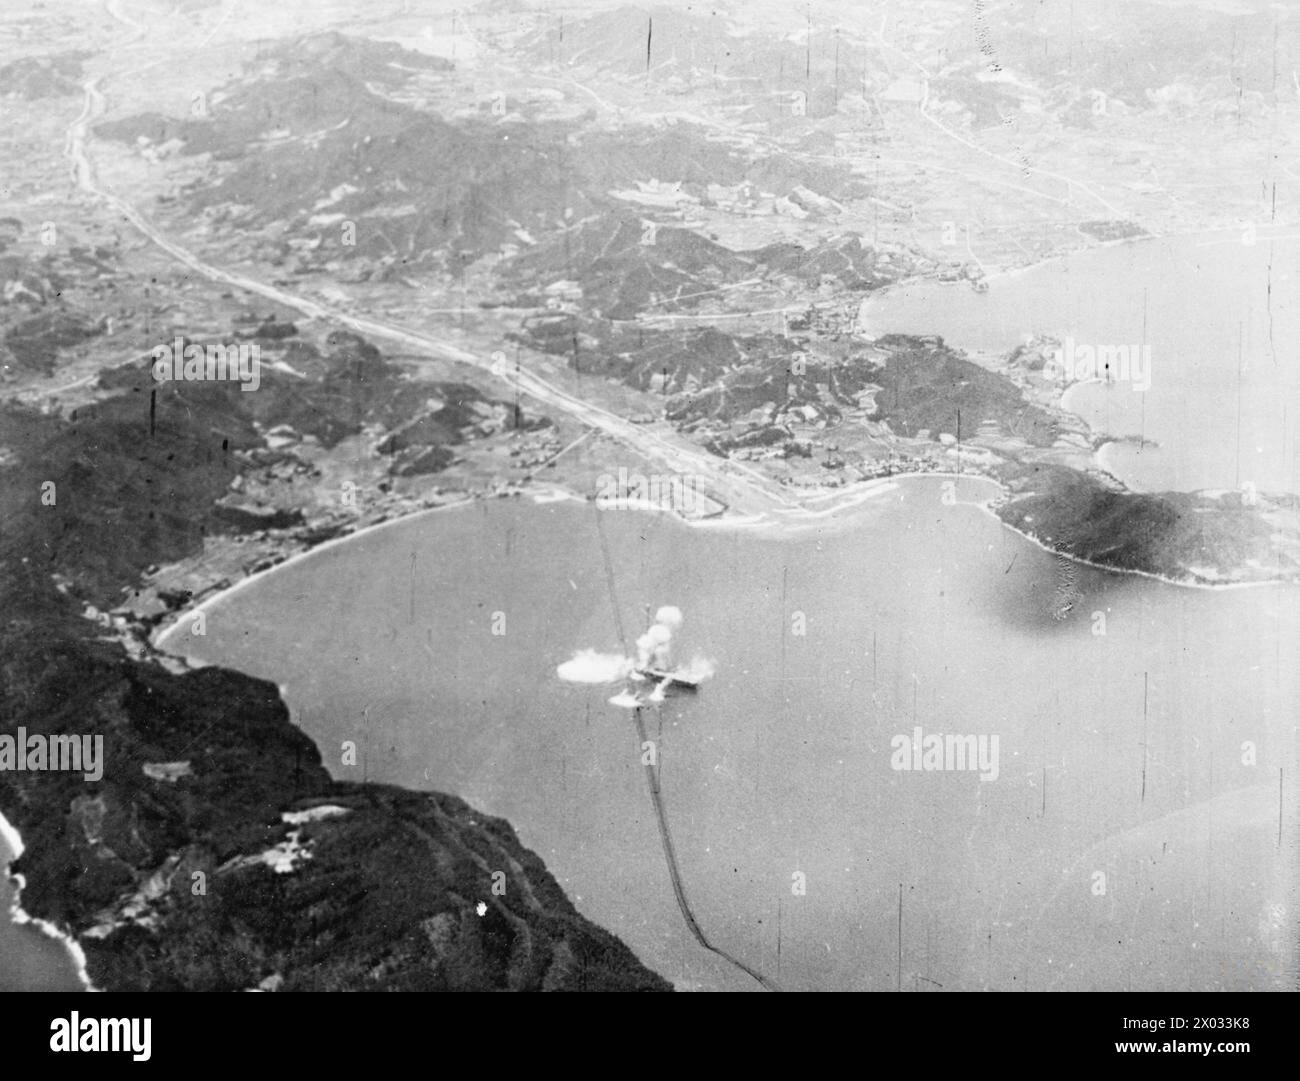 JAPANESE CARRIER IN INLAND SEA HIT BY BRITISH NAVY BOMBS. 24 JULY 1945, AERIAL PHOTOGRAPHS FROM AN ATTACKING AIRCRAFT OF THE BRITISH PACIFIC FLEET. - British Naval aircraft of the British Pacific Fleet Task Force score a direct hit on a Japanese escort carrier of the Kobe class in Shido Wan, a bay on the coast of Shikoku. The carrier, the SHIMANE MARU, was wrecked by a bomb going down the aircraft well Stock Photo